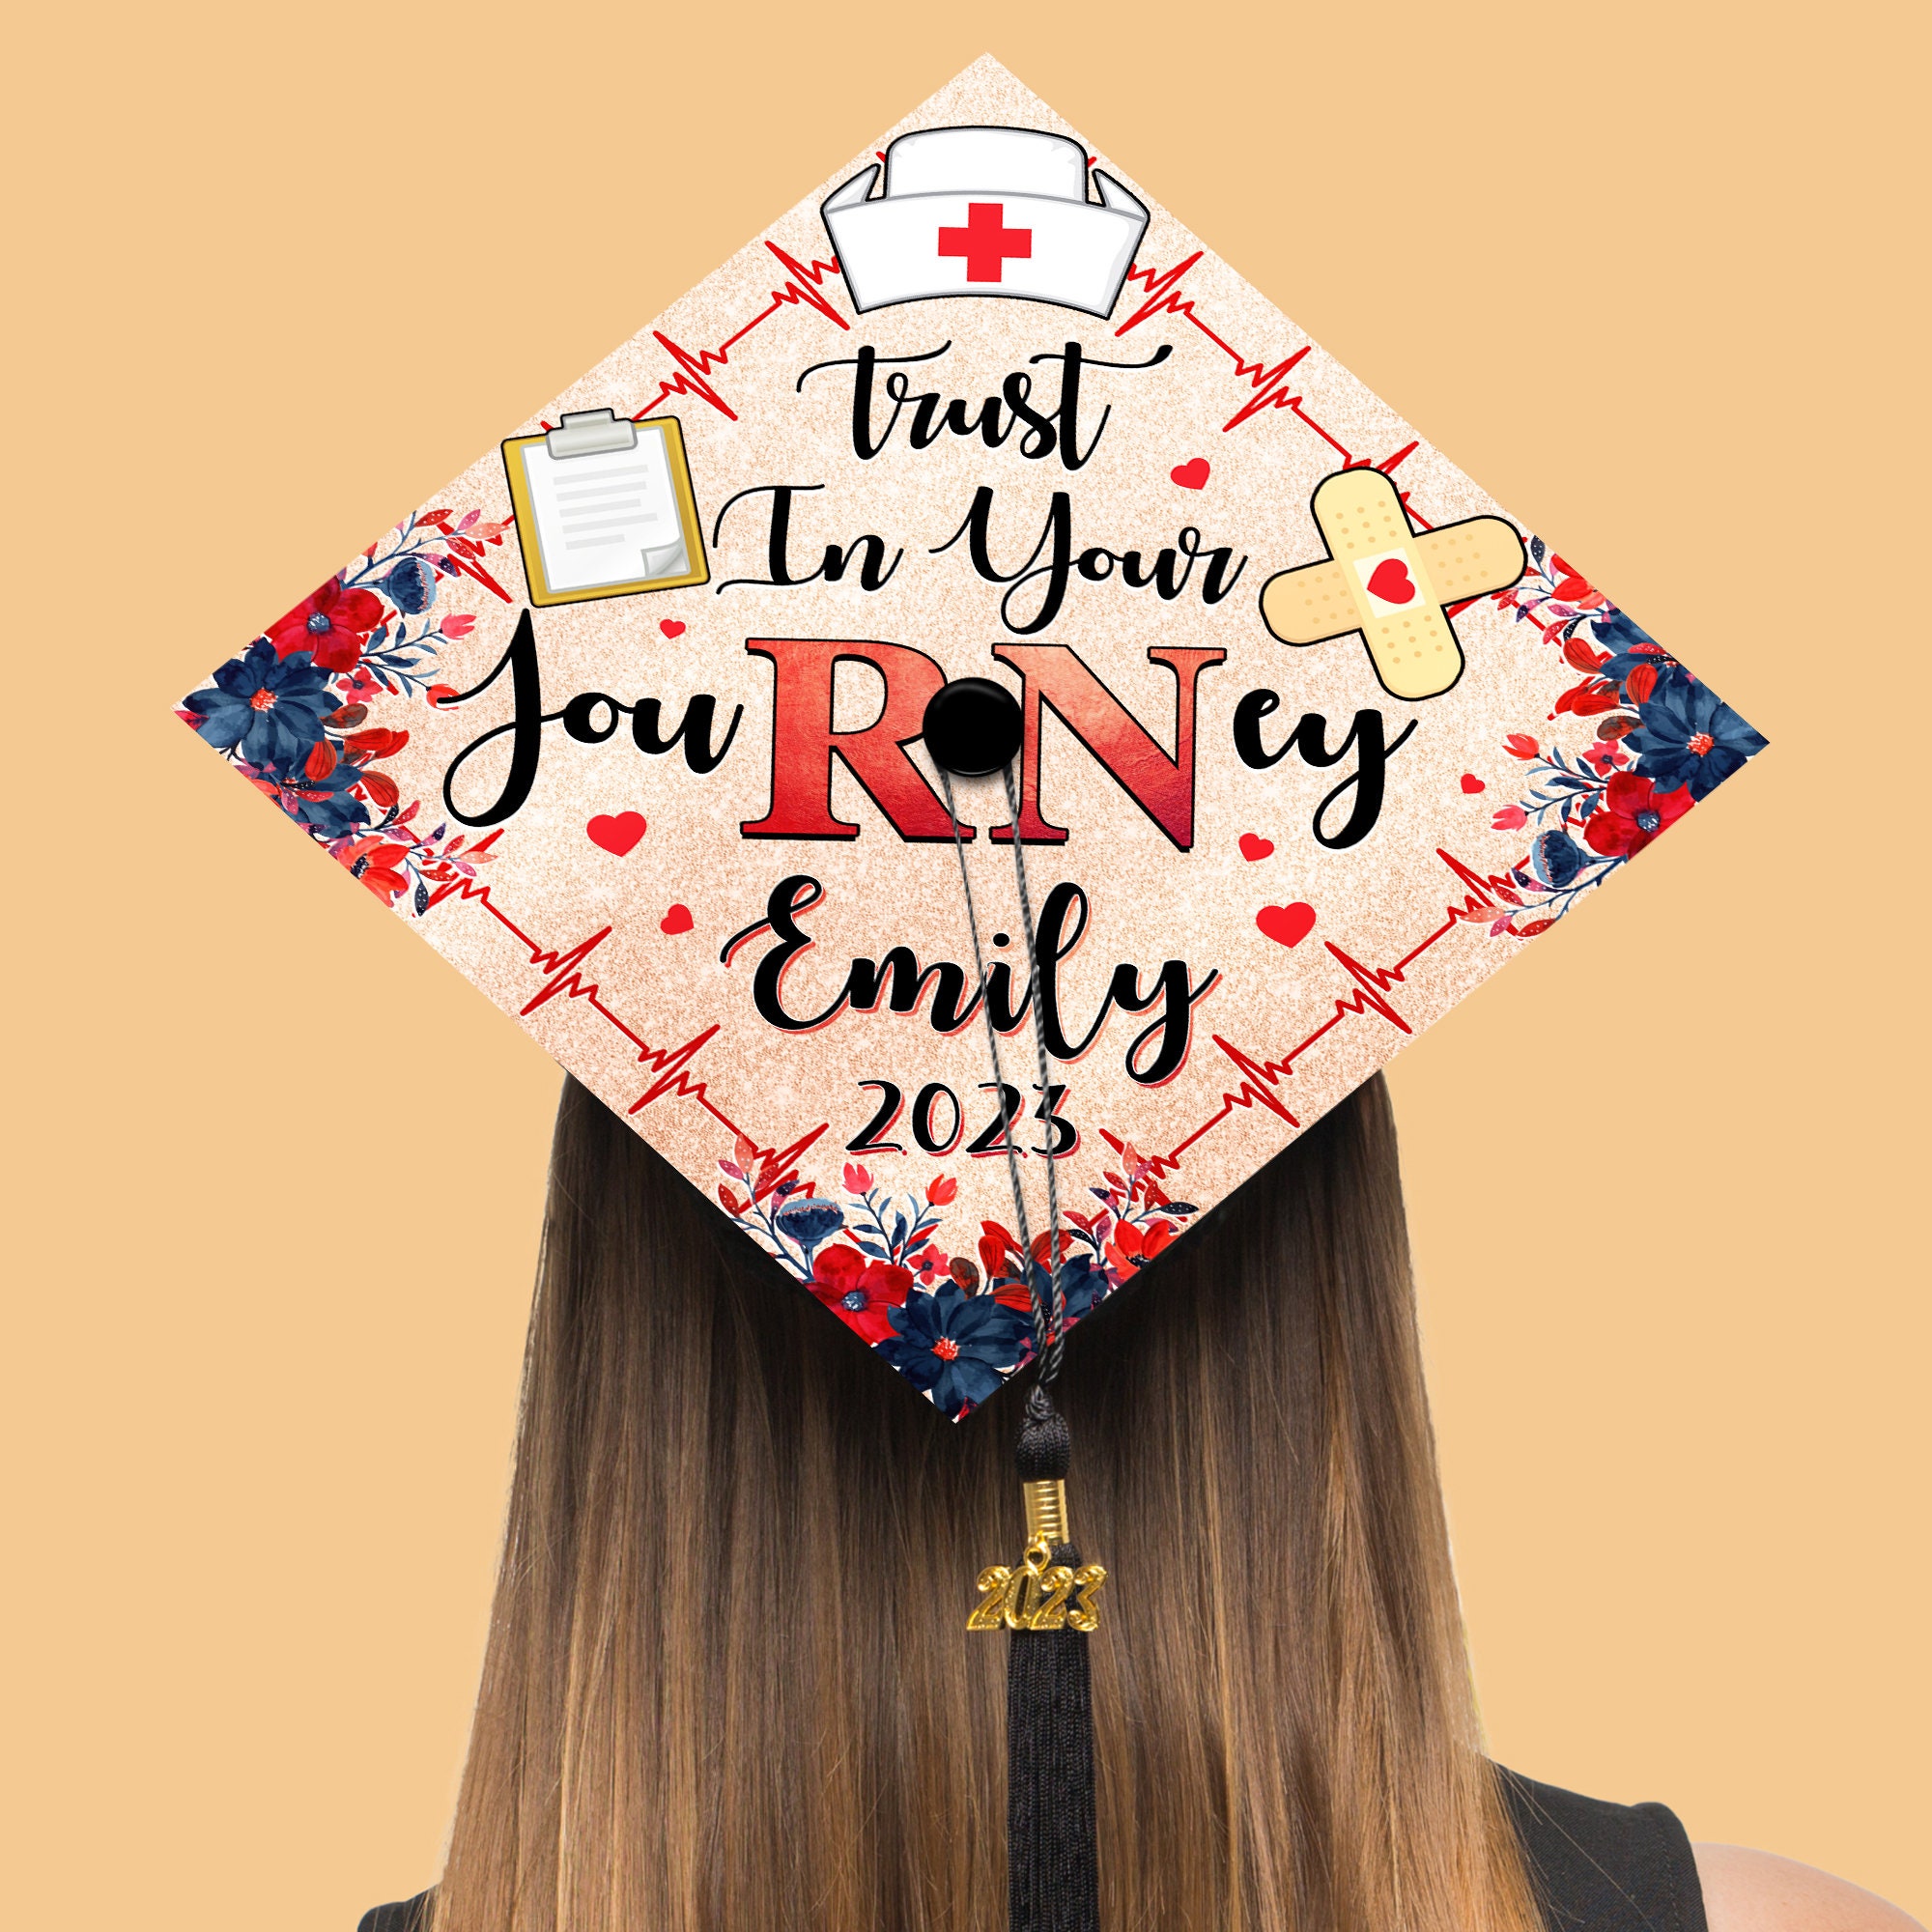 20 Graduation Cap Ideas For The Senior Who Wants To Make All Their Peers  Jealous